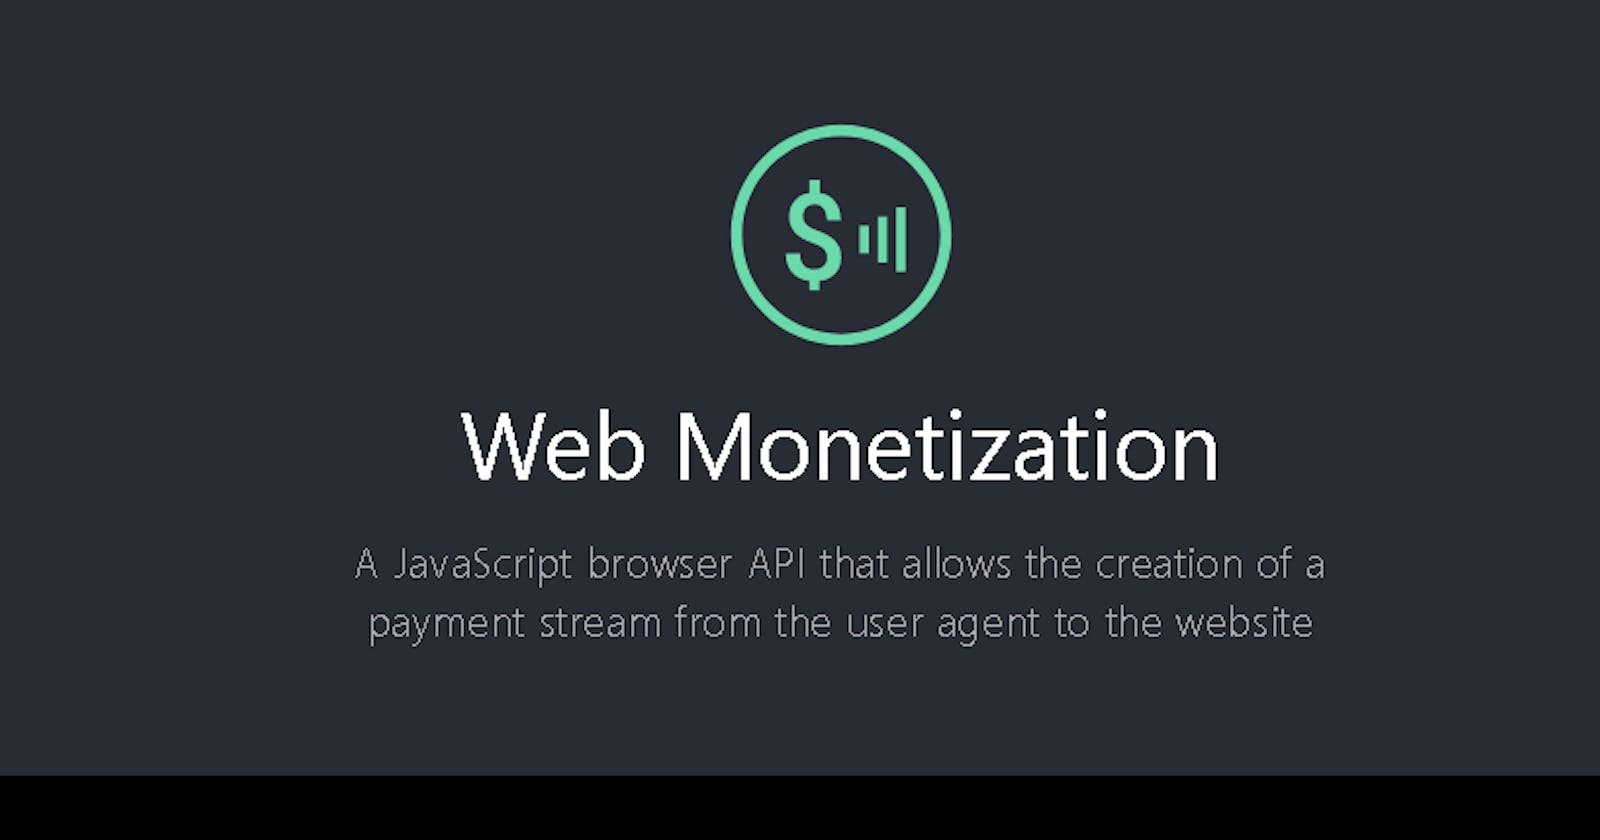 Learn Web Monetization and How to Monetize Your Content